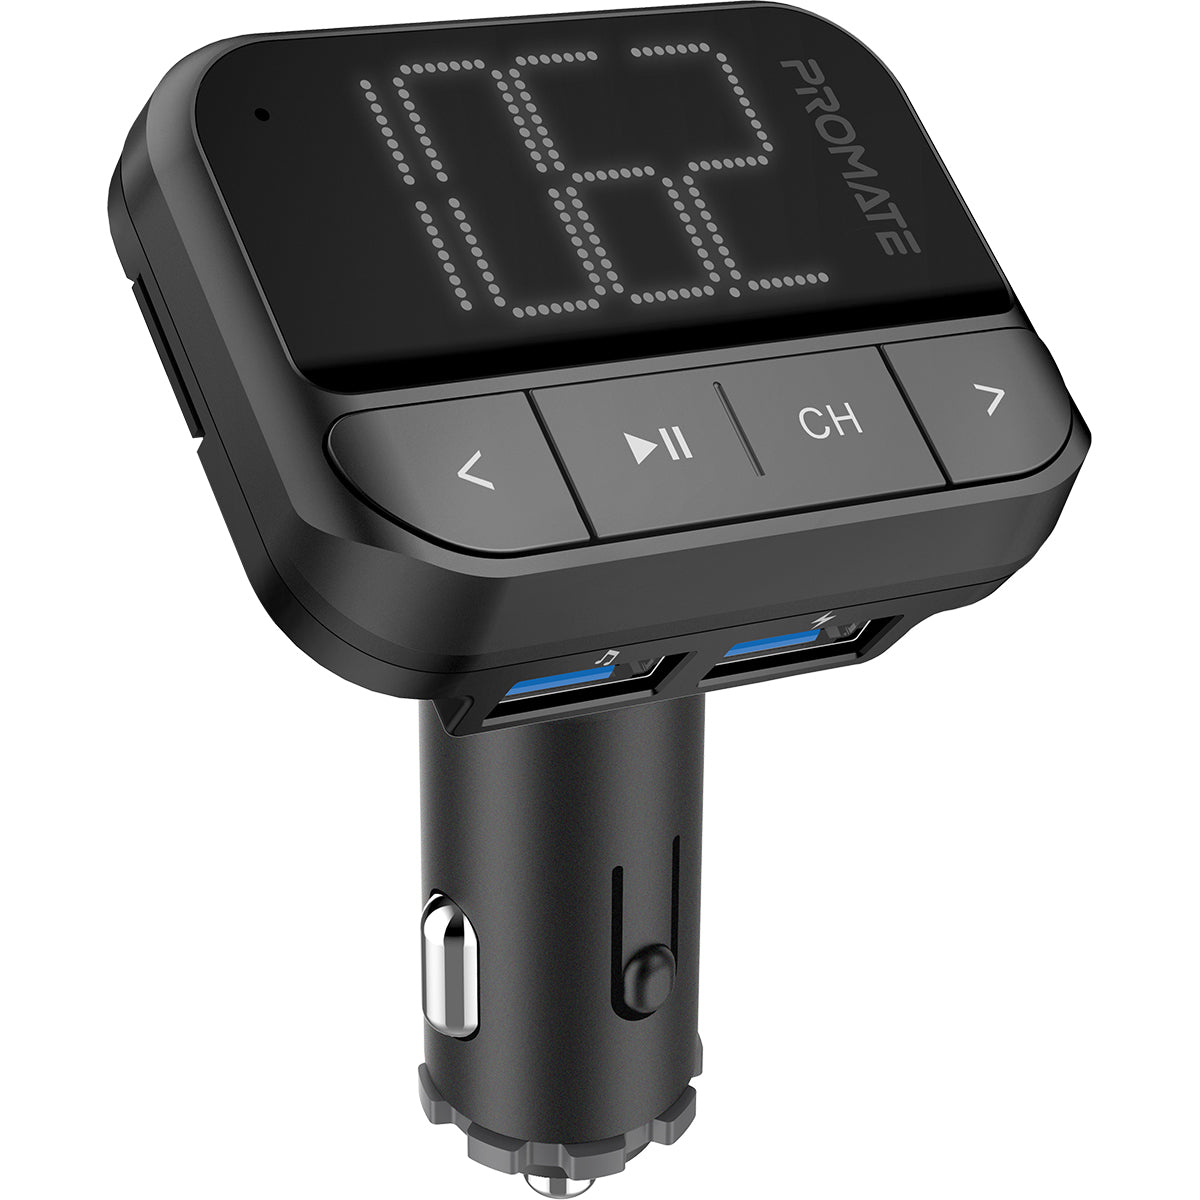 Promate Car FM Transmitter, Wireless In-Car Radio Adapter Kit with Dual USB Ports, Hands-Free Calling, AUX Port, TF Card Slot, LED Display, Multiple EQ Modes and Remote Control for Smartphones, Tablets, EzFM-2